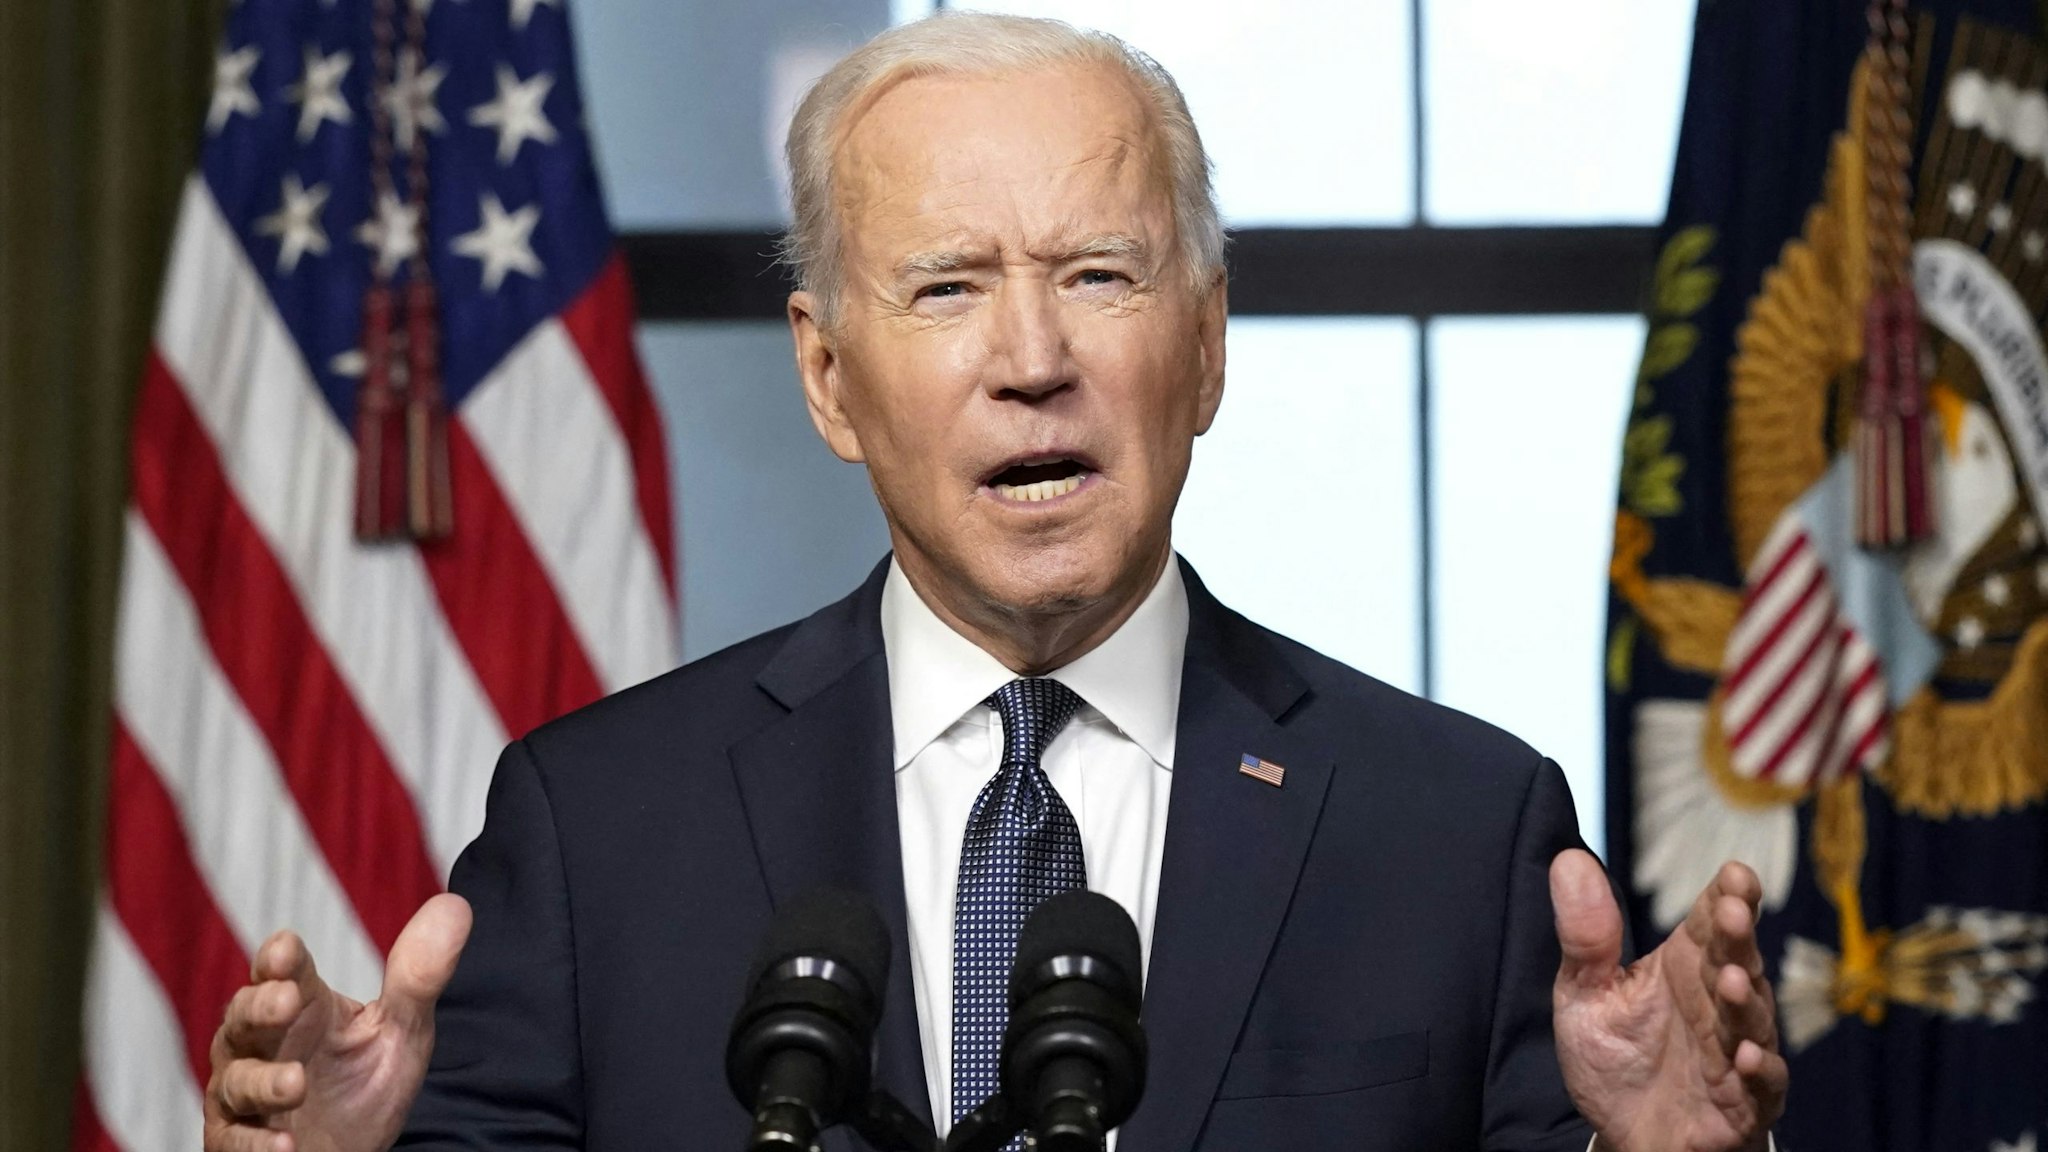 U.S. President Joe Biden speaks in the Treaty Room of the White House in Washington, D.C., U.S., on Wednesday, April 14, 2021. Biden announced his decision to fully withdraw U.S. forces from Afghanistan by the 20th anniversary of the September 11, 2001 attacks, declaring that it's "time for Americas troops to come home."